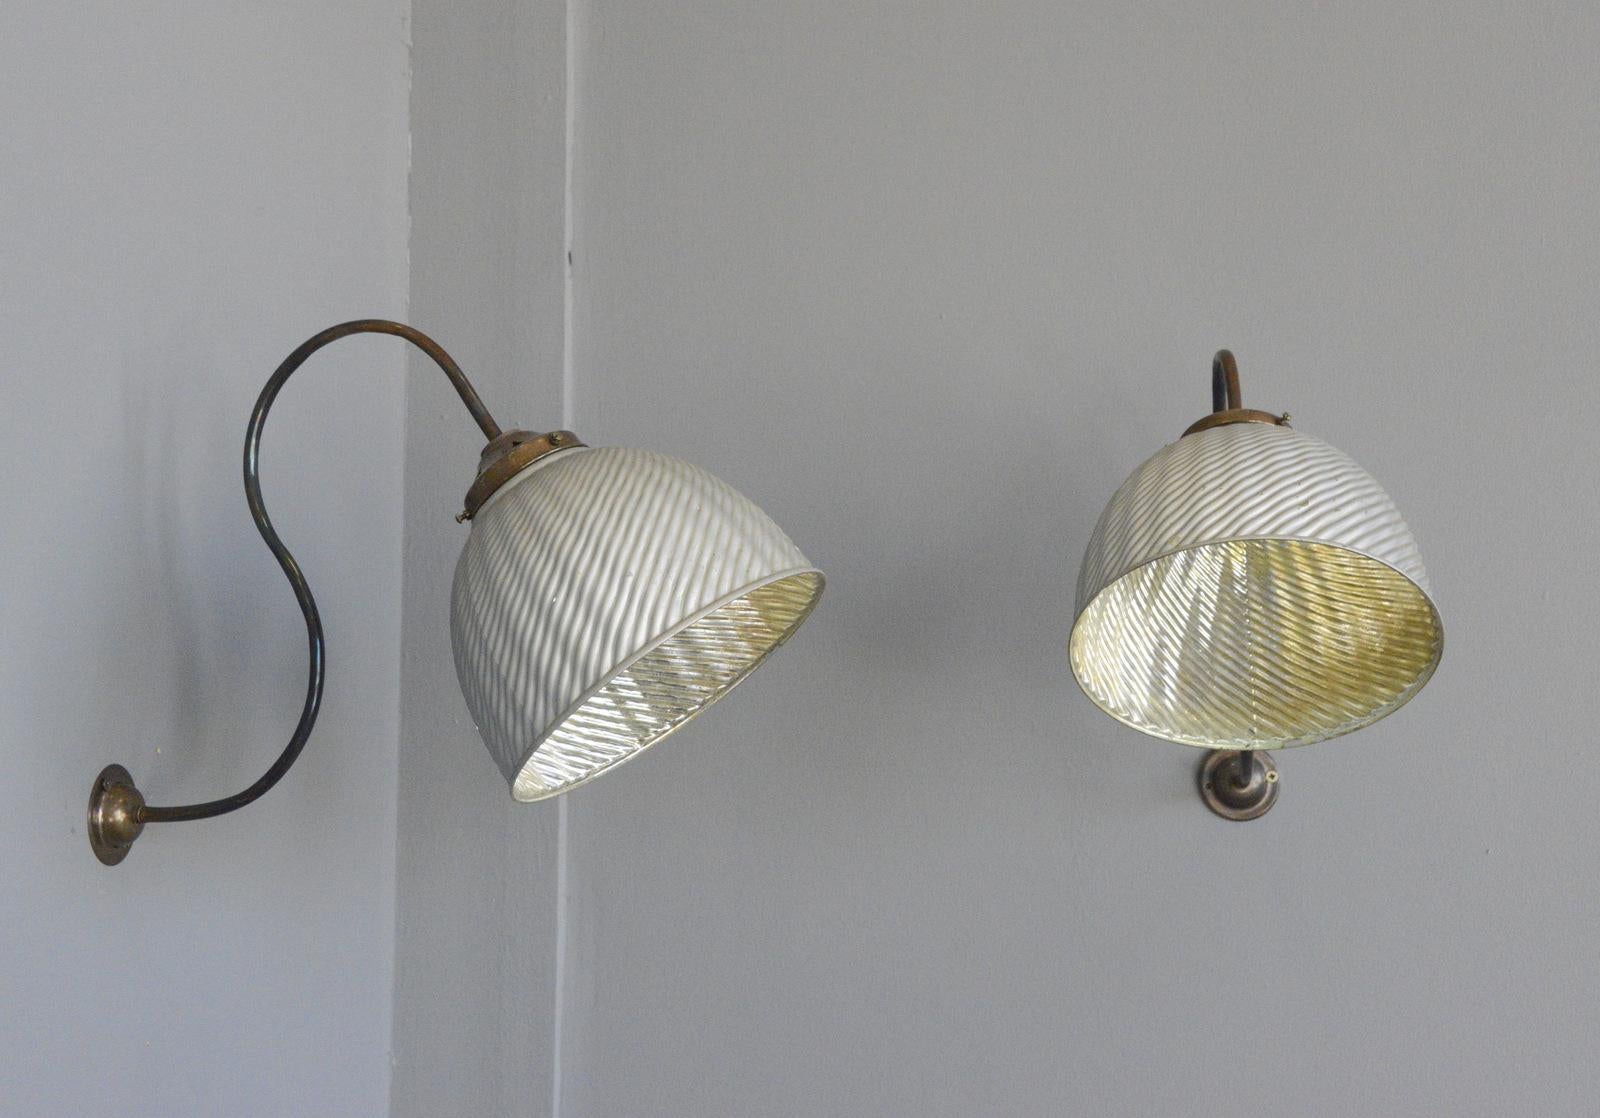 Large wall-mounted mercury lights, circa 1920s

- Price is per light (2 available)
- Curved copper arms
- Mercury glass mirrored reflectors
- Takes E27 fitting bulbs
- Wires directly into the wall
- Czech ~ 1920s
- Measures: 25cm wide x 50cm tall x